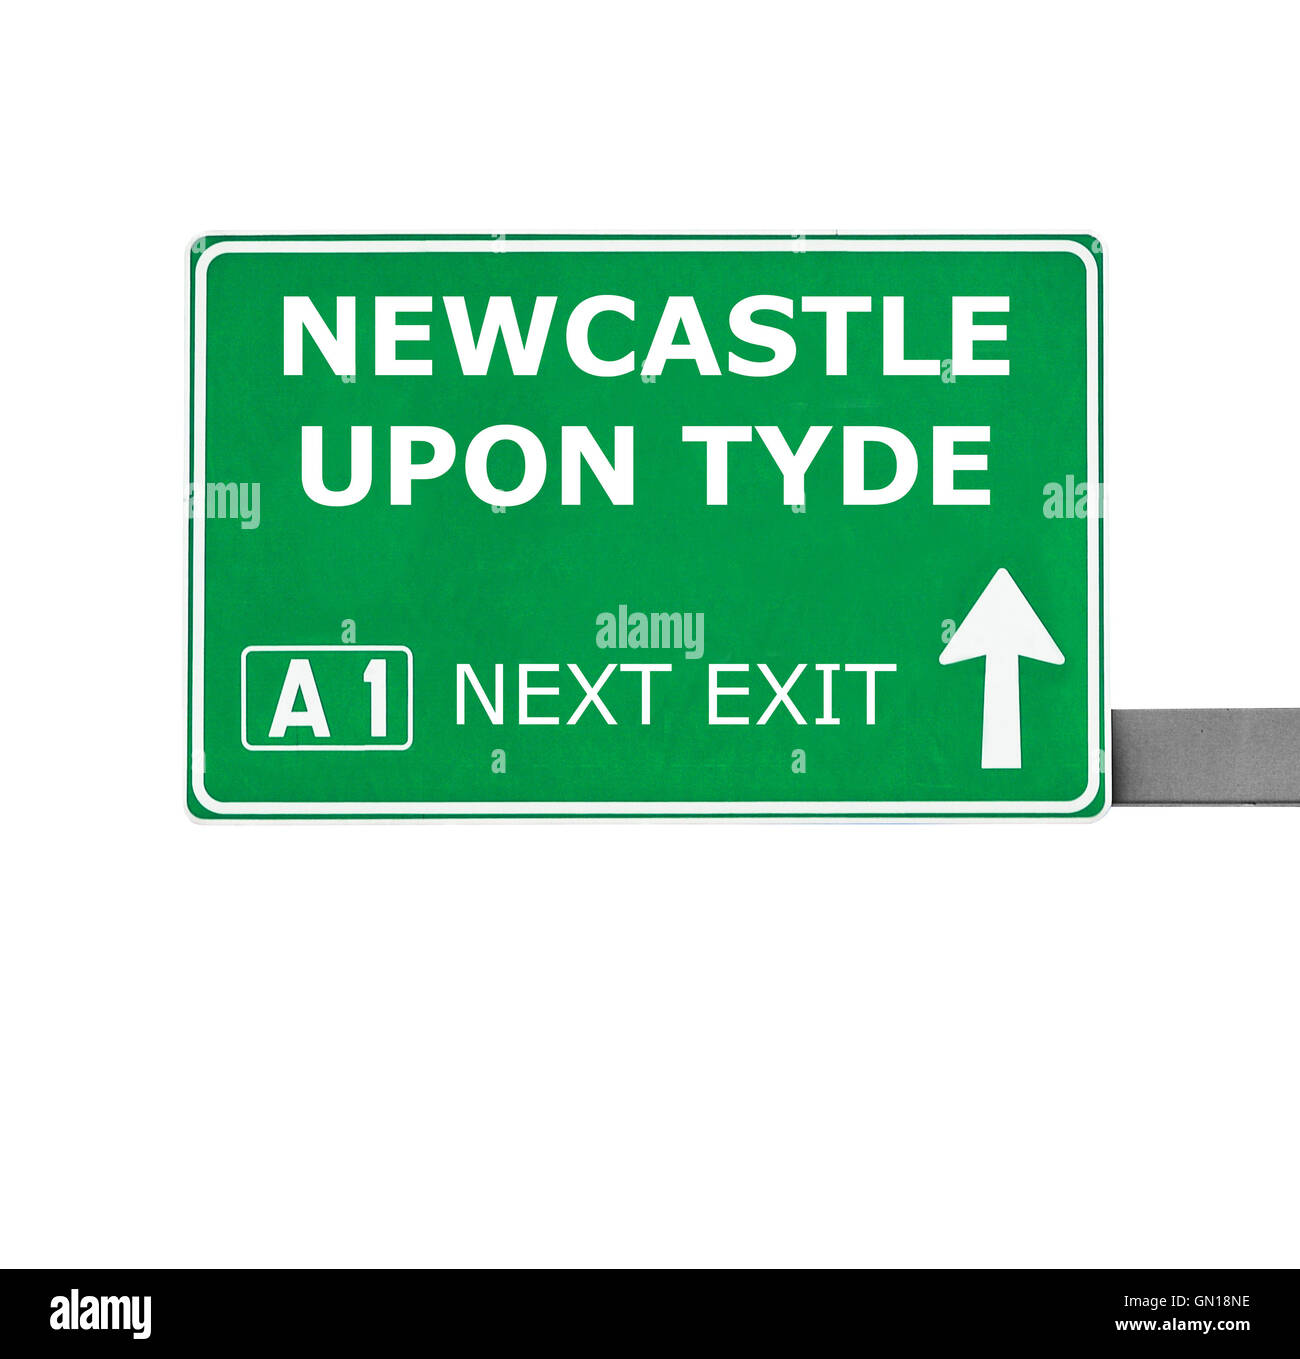 NEWCASTLE TYDE road sign isolated on white Banque D'Images